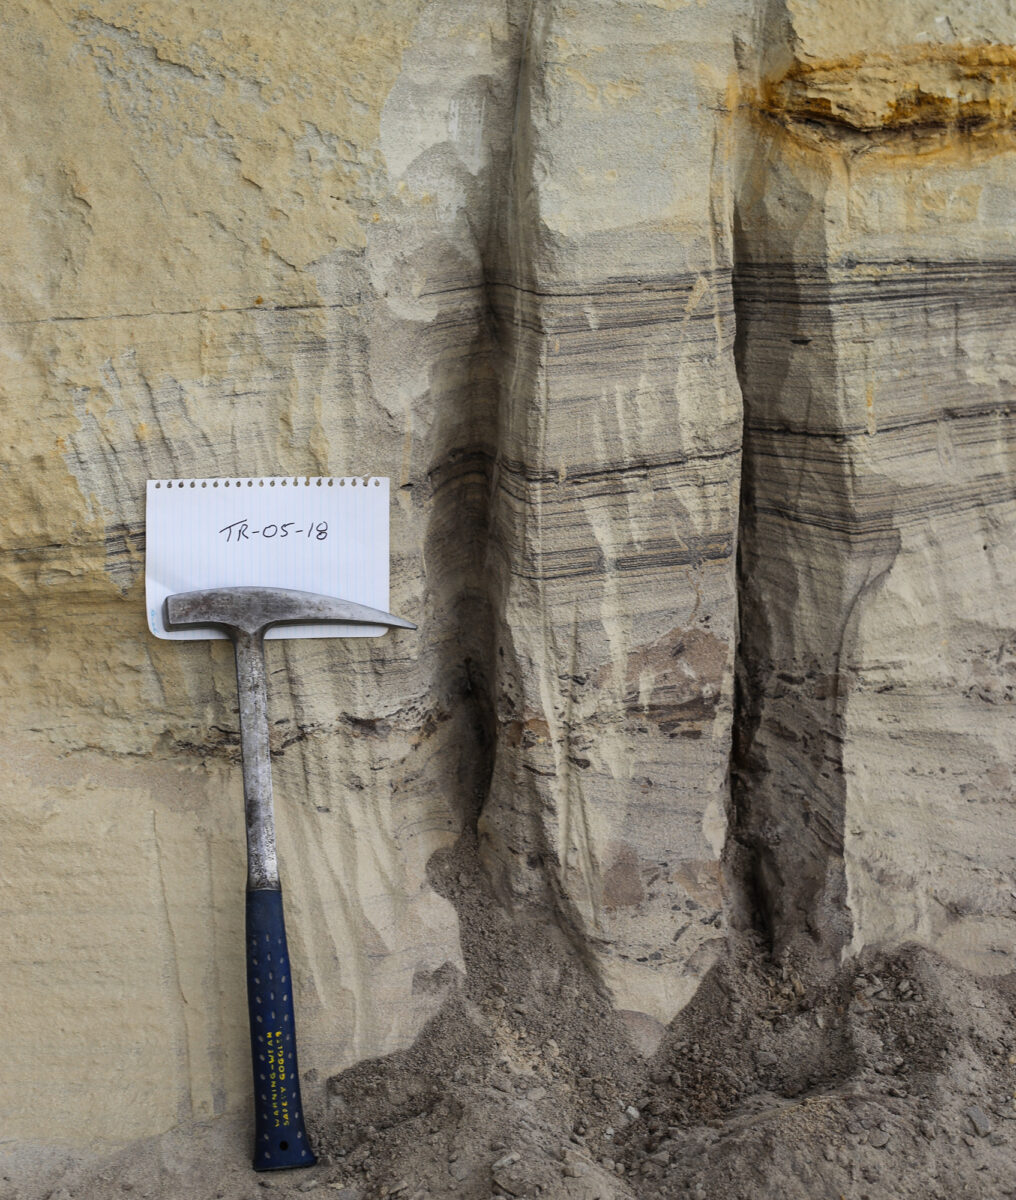 Sample site featuring heavy mineral laminae in beach placer deposits of the Fox Hills Sandstone at "Titanium Ridge" in Elbert County, Colorado. Photo credit: Michael O'Keeffe for the CGS.